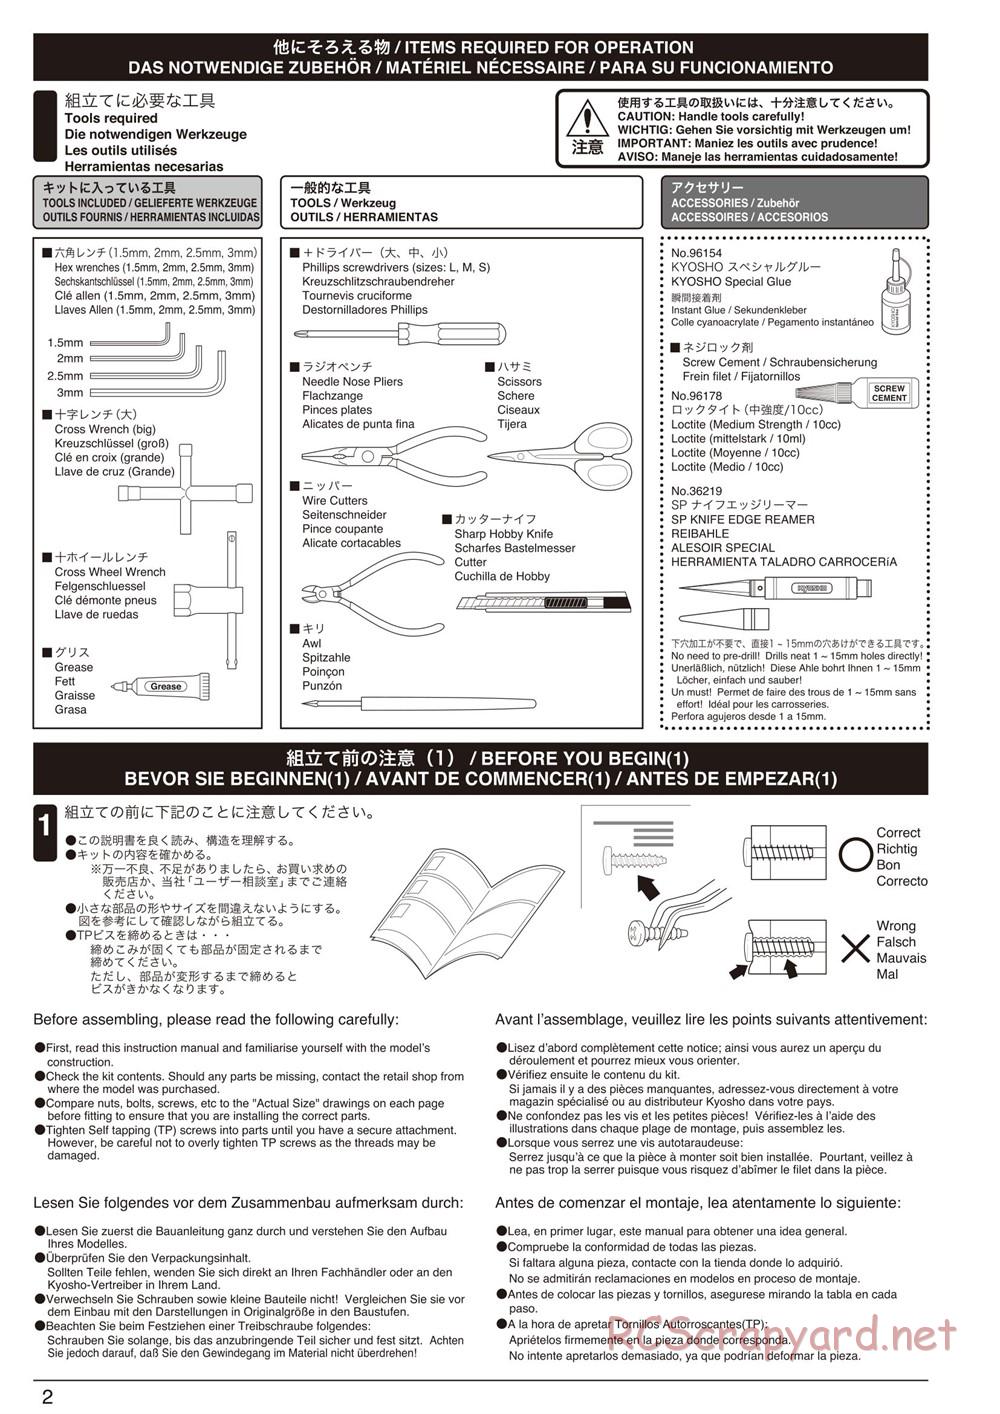 Kyosho - FO-XX VE - Manual - Page 2